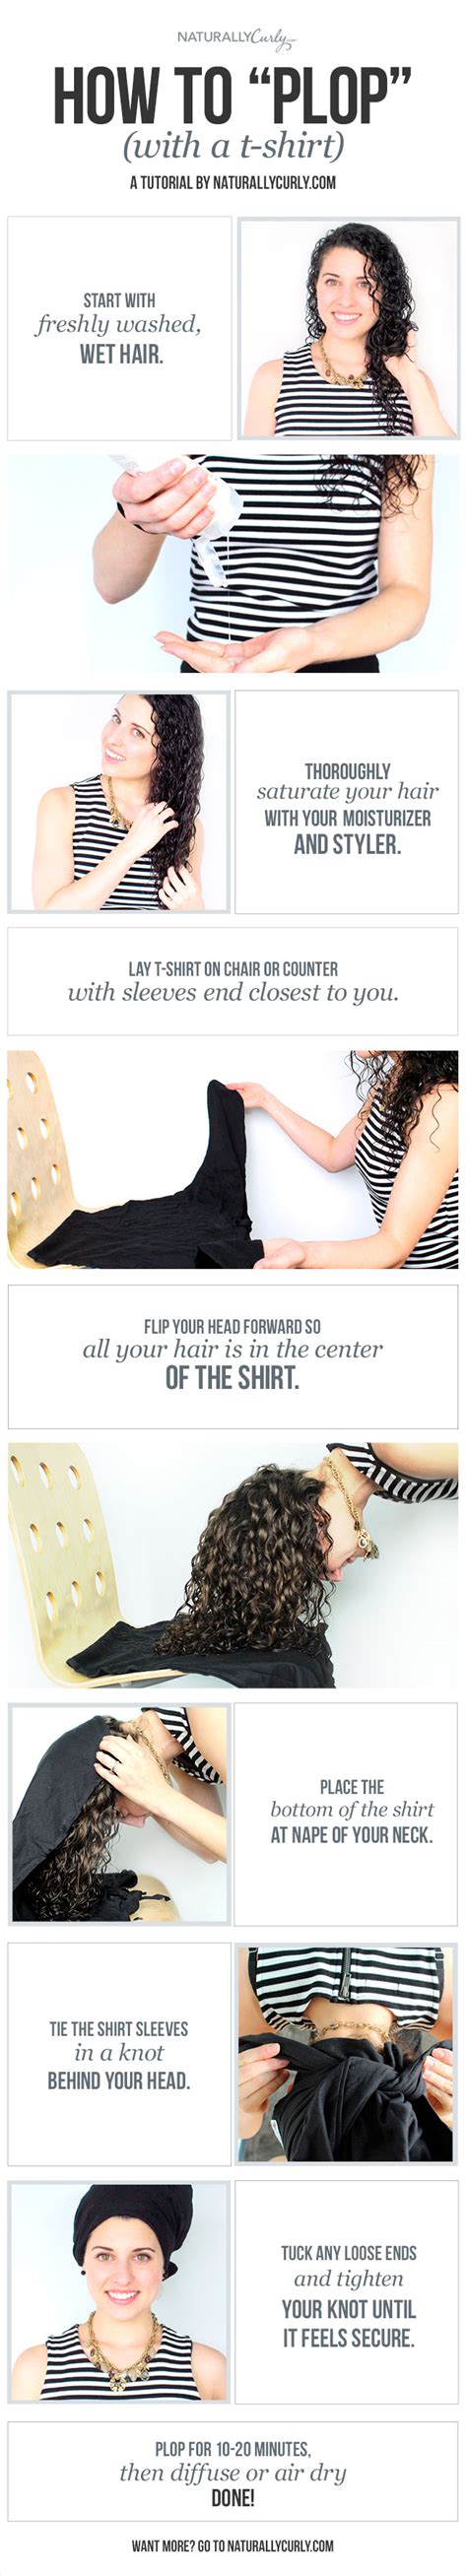 how to plop your hair for magical curls